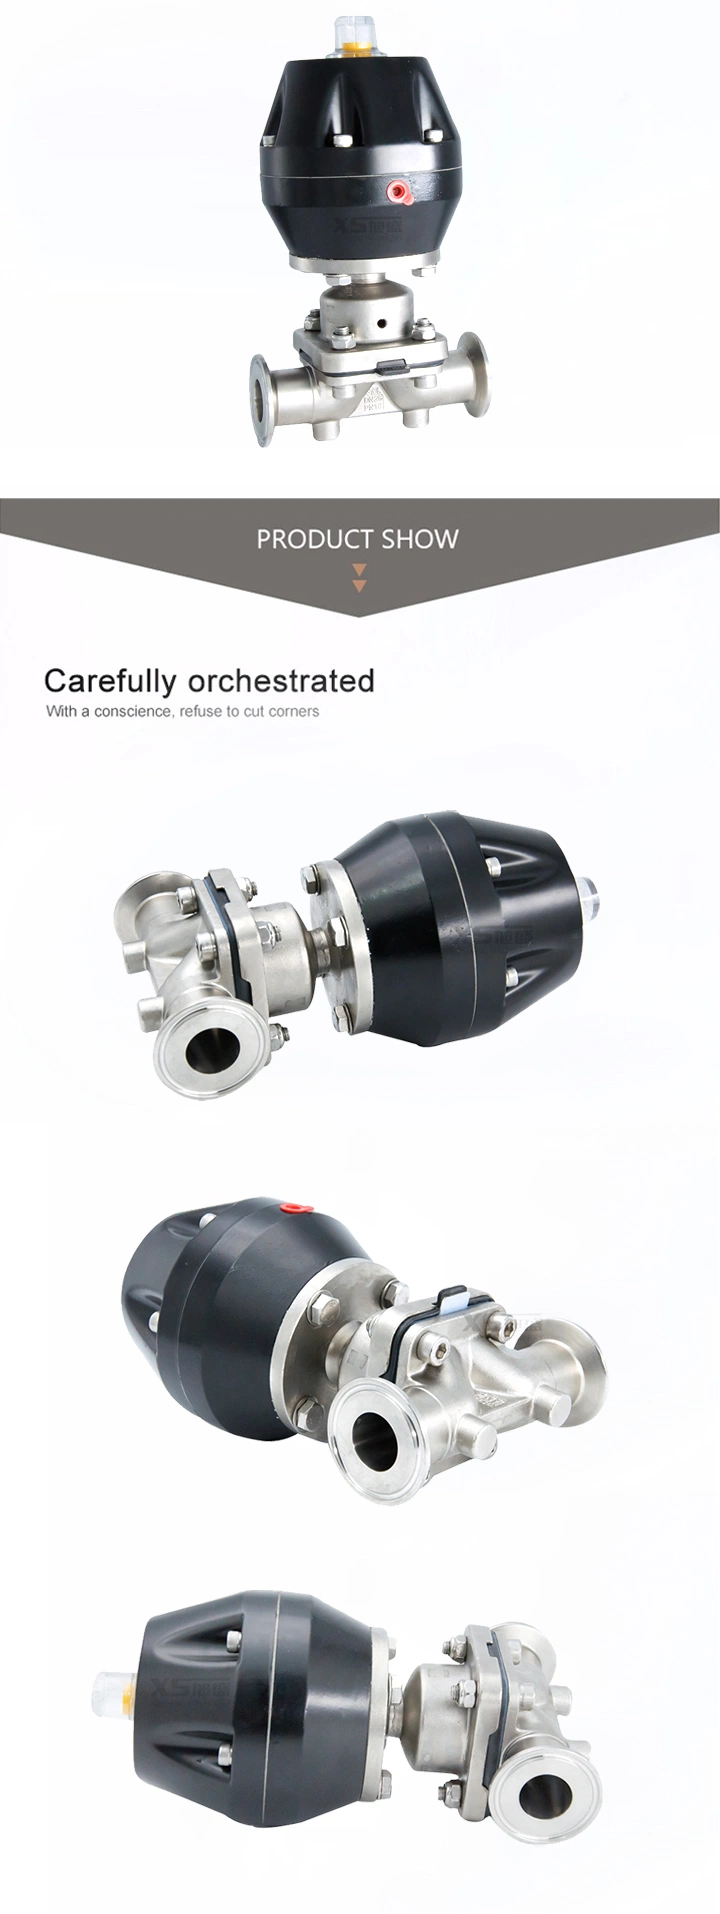 Hygienic Stainless Steel Clamped Pneumatic Actuator Diaphragm Valves